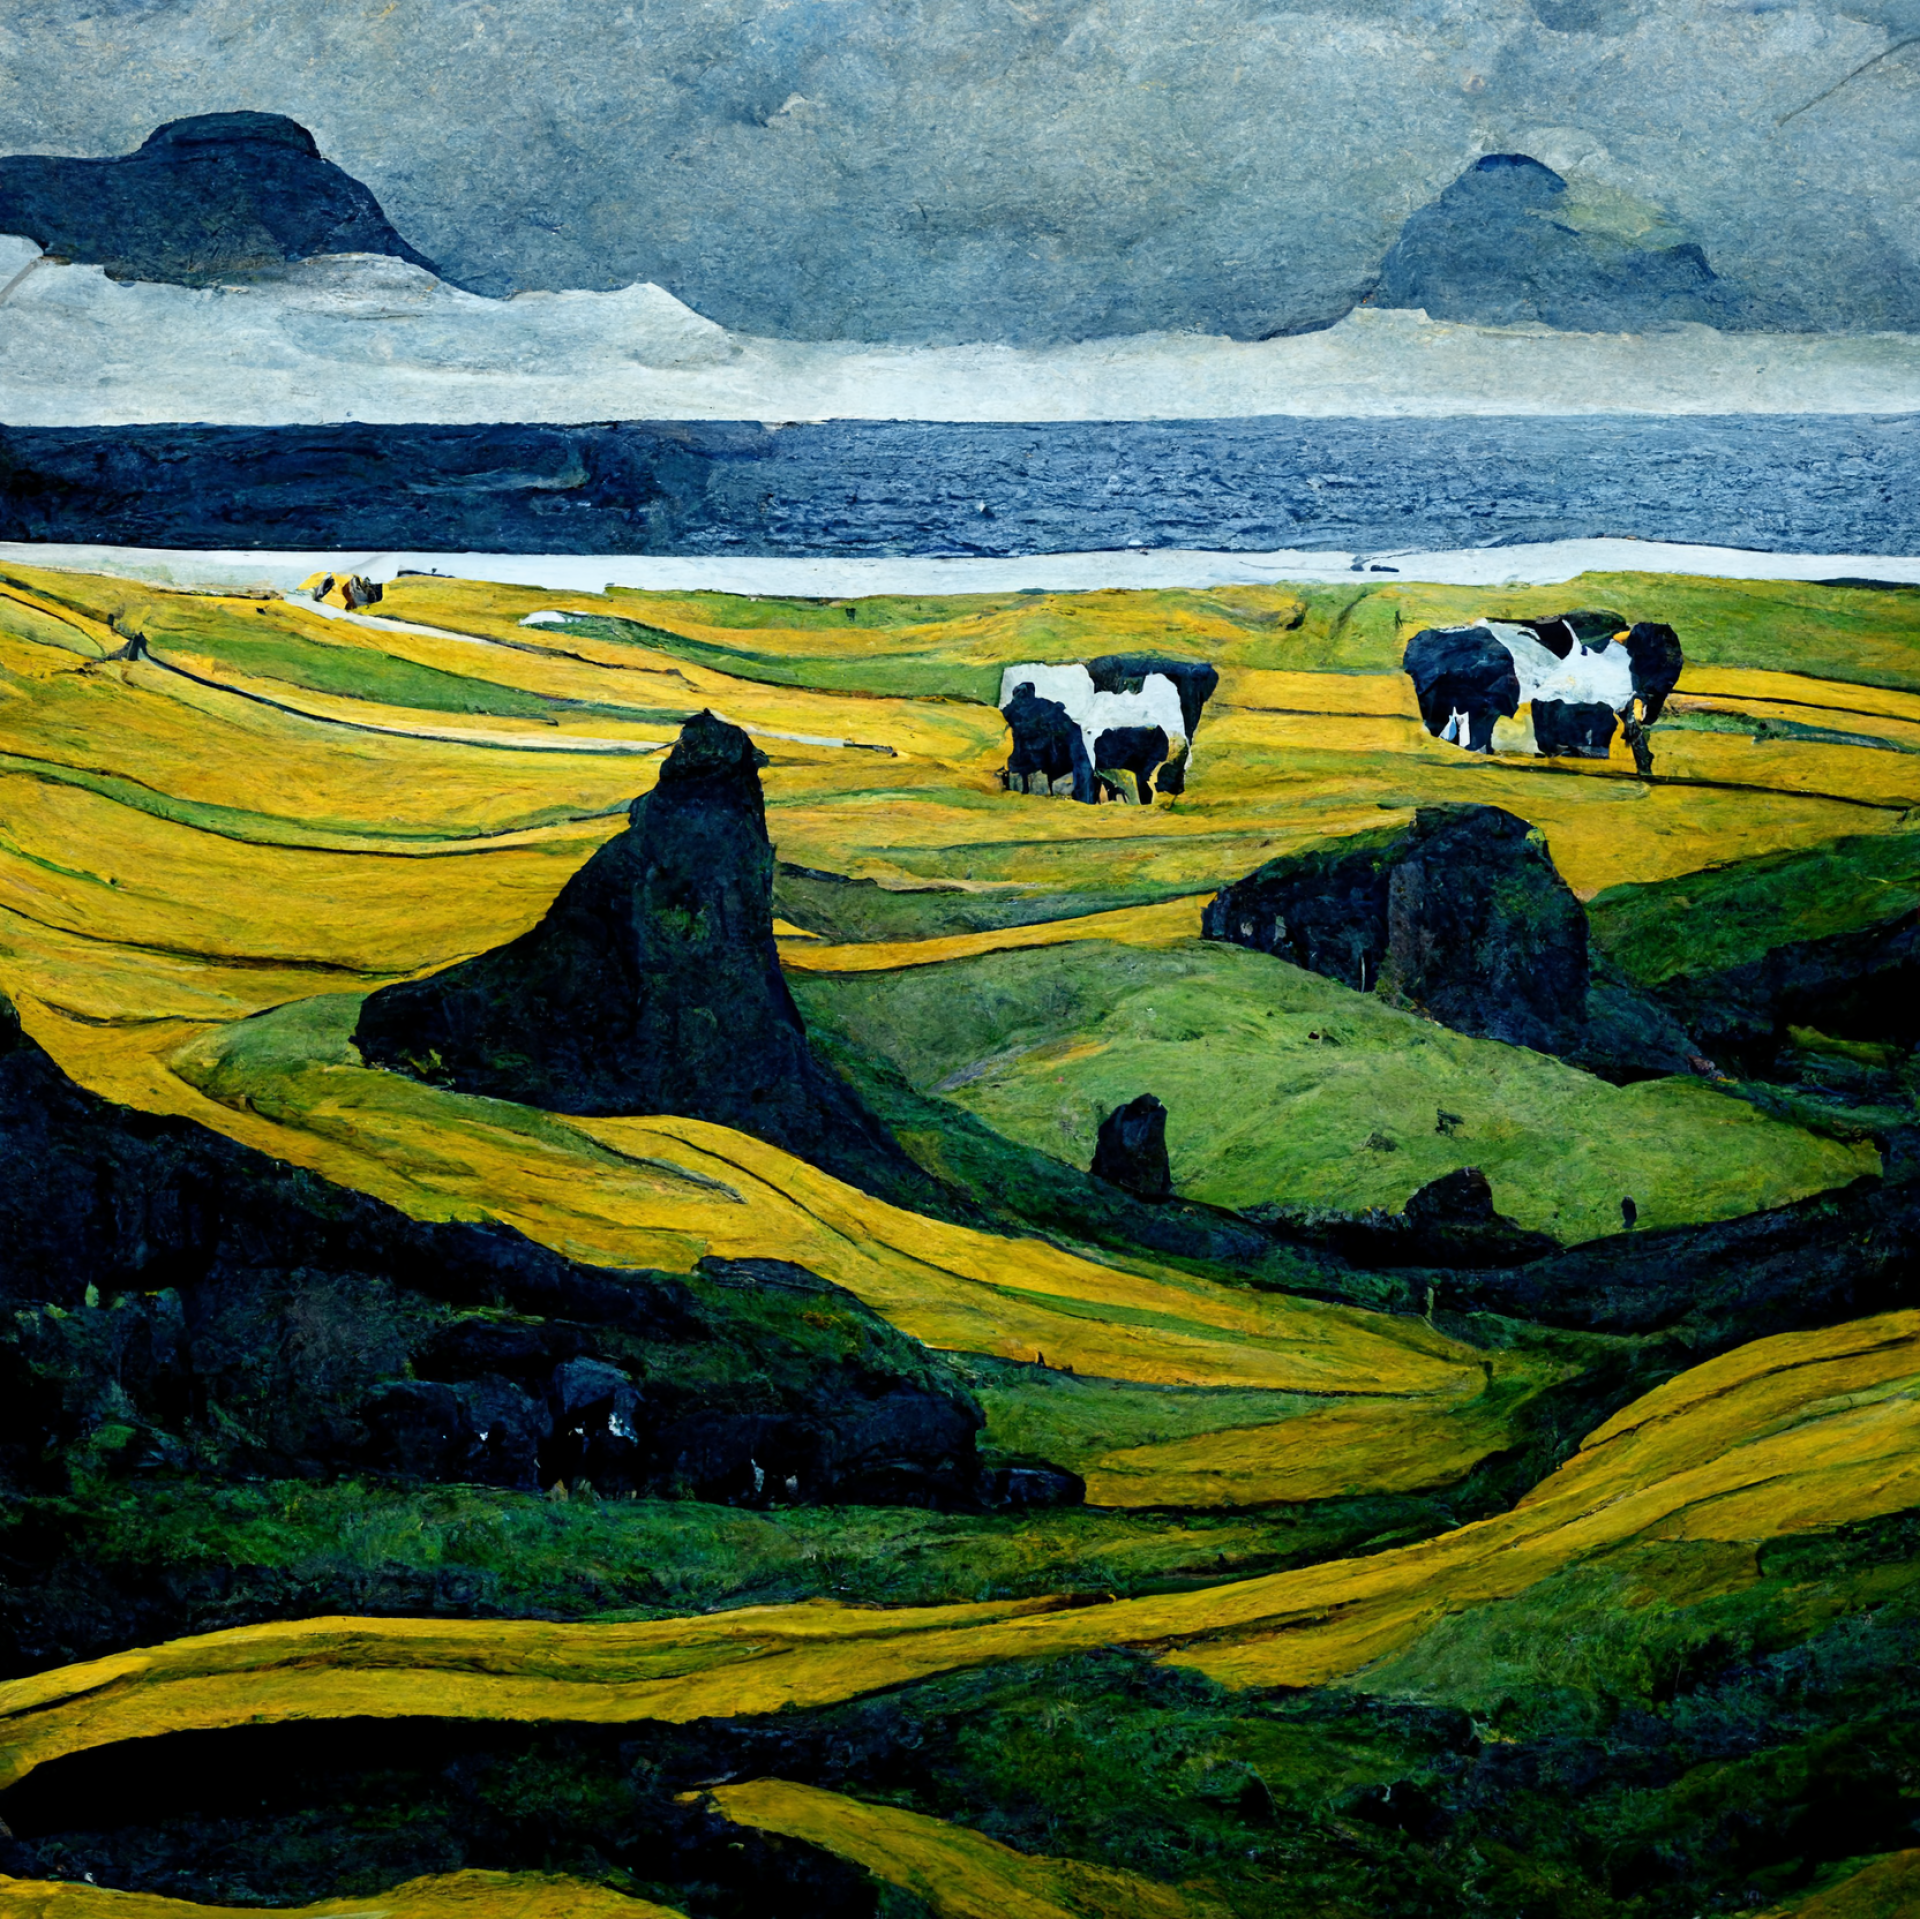 AI-generated image from Midjourney, the Faroe Islands inspired by Vincent Van Gogh